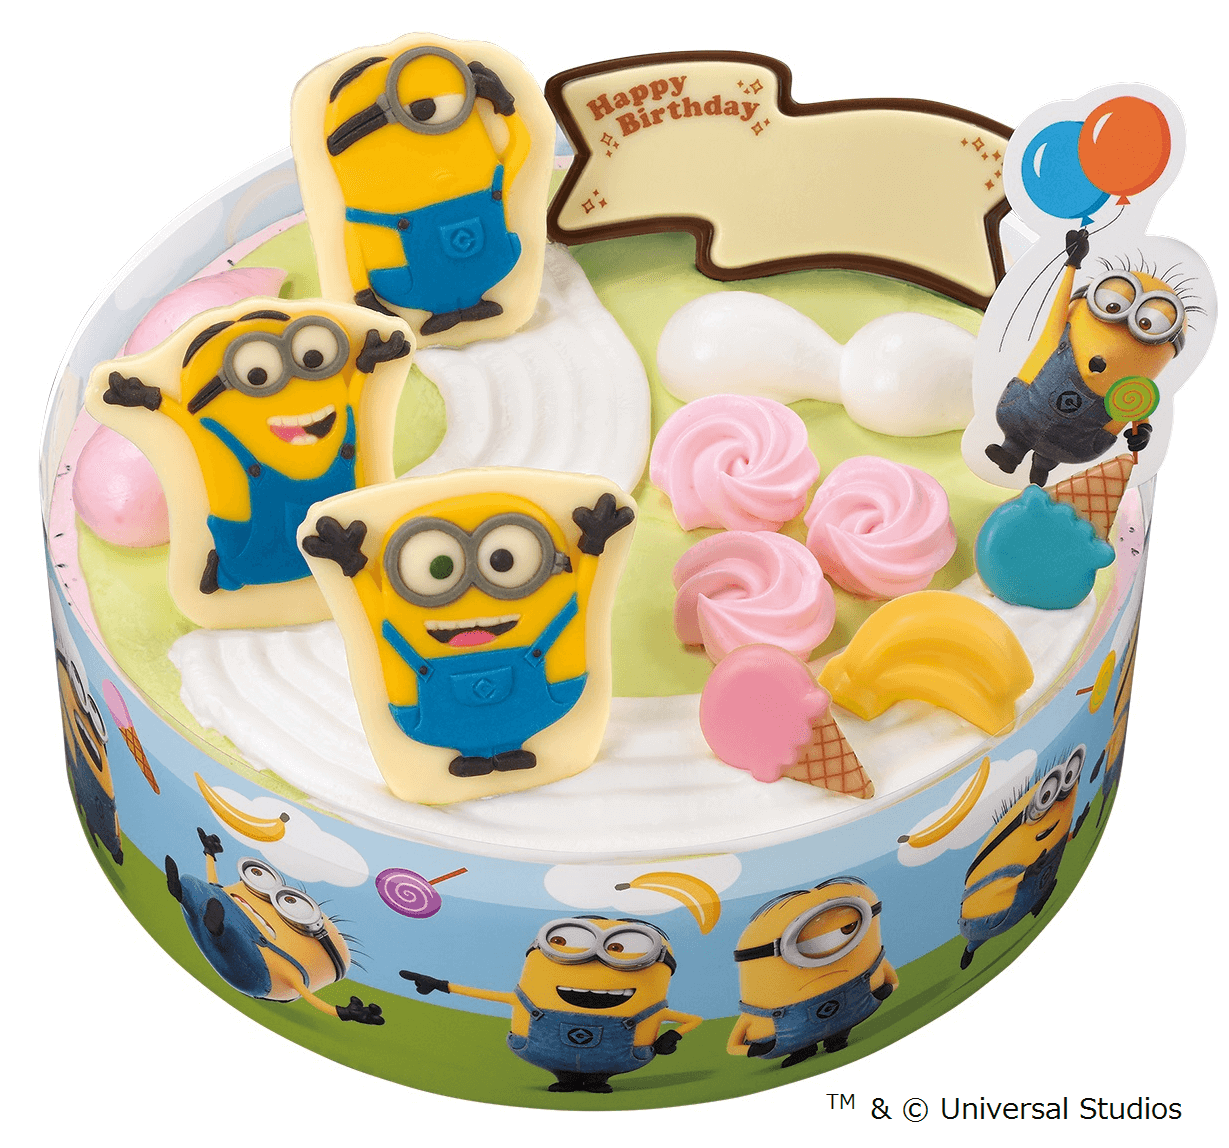 Limited Edition Minions Ice Cream to be Sold This Summer ...